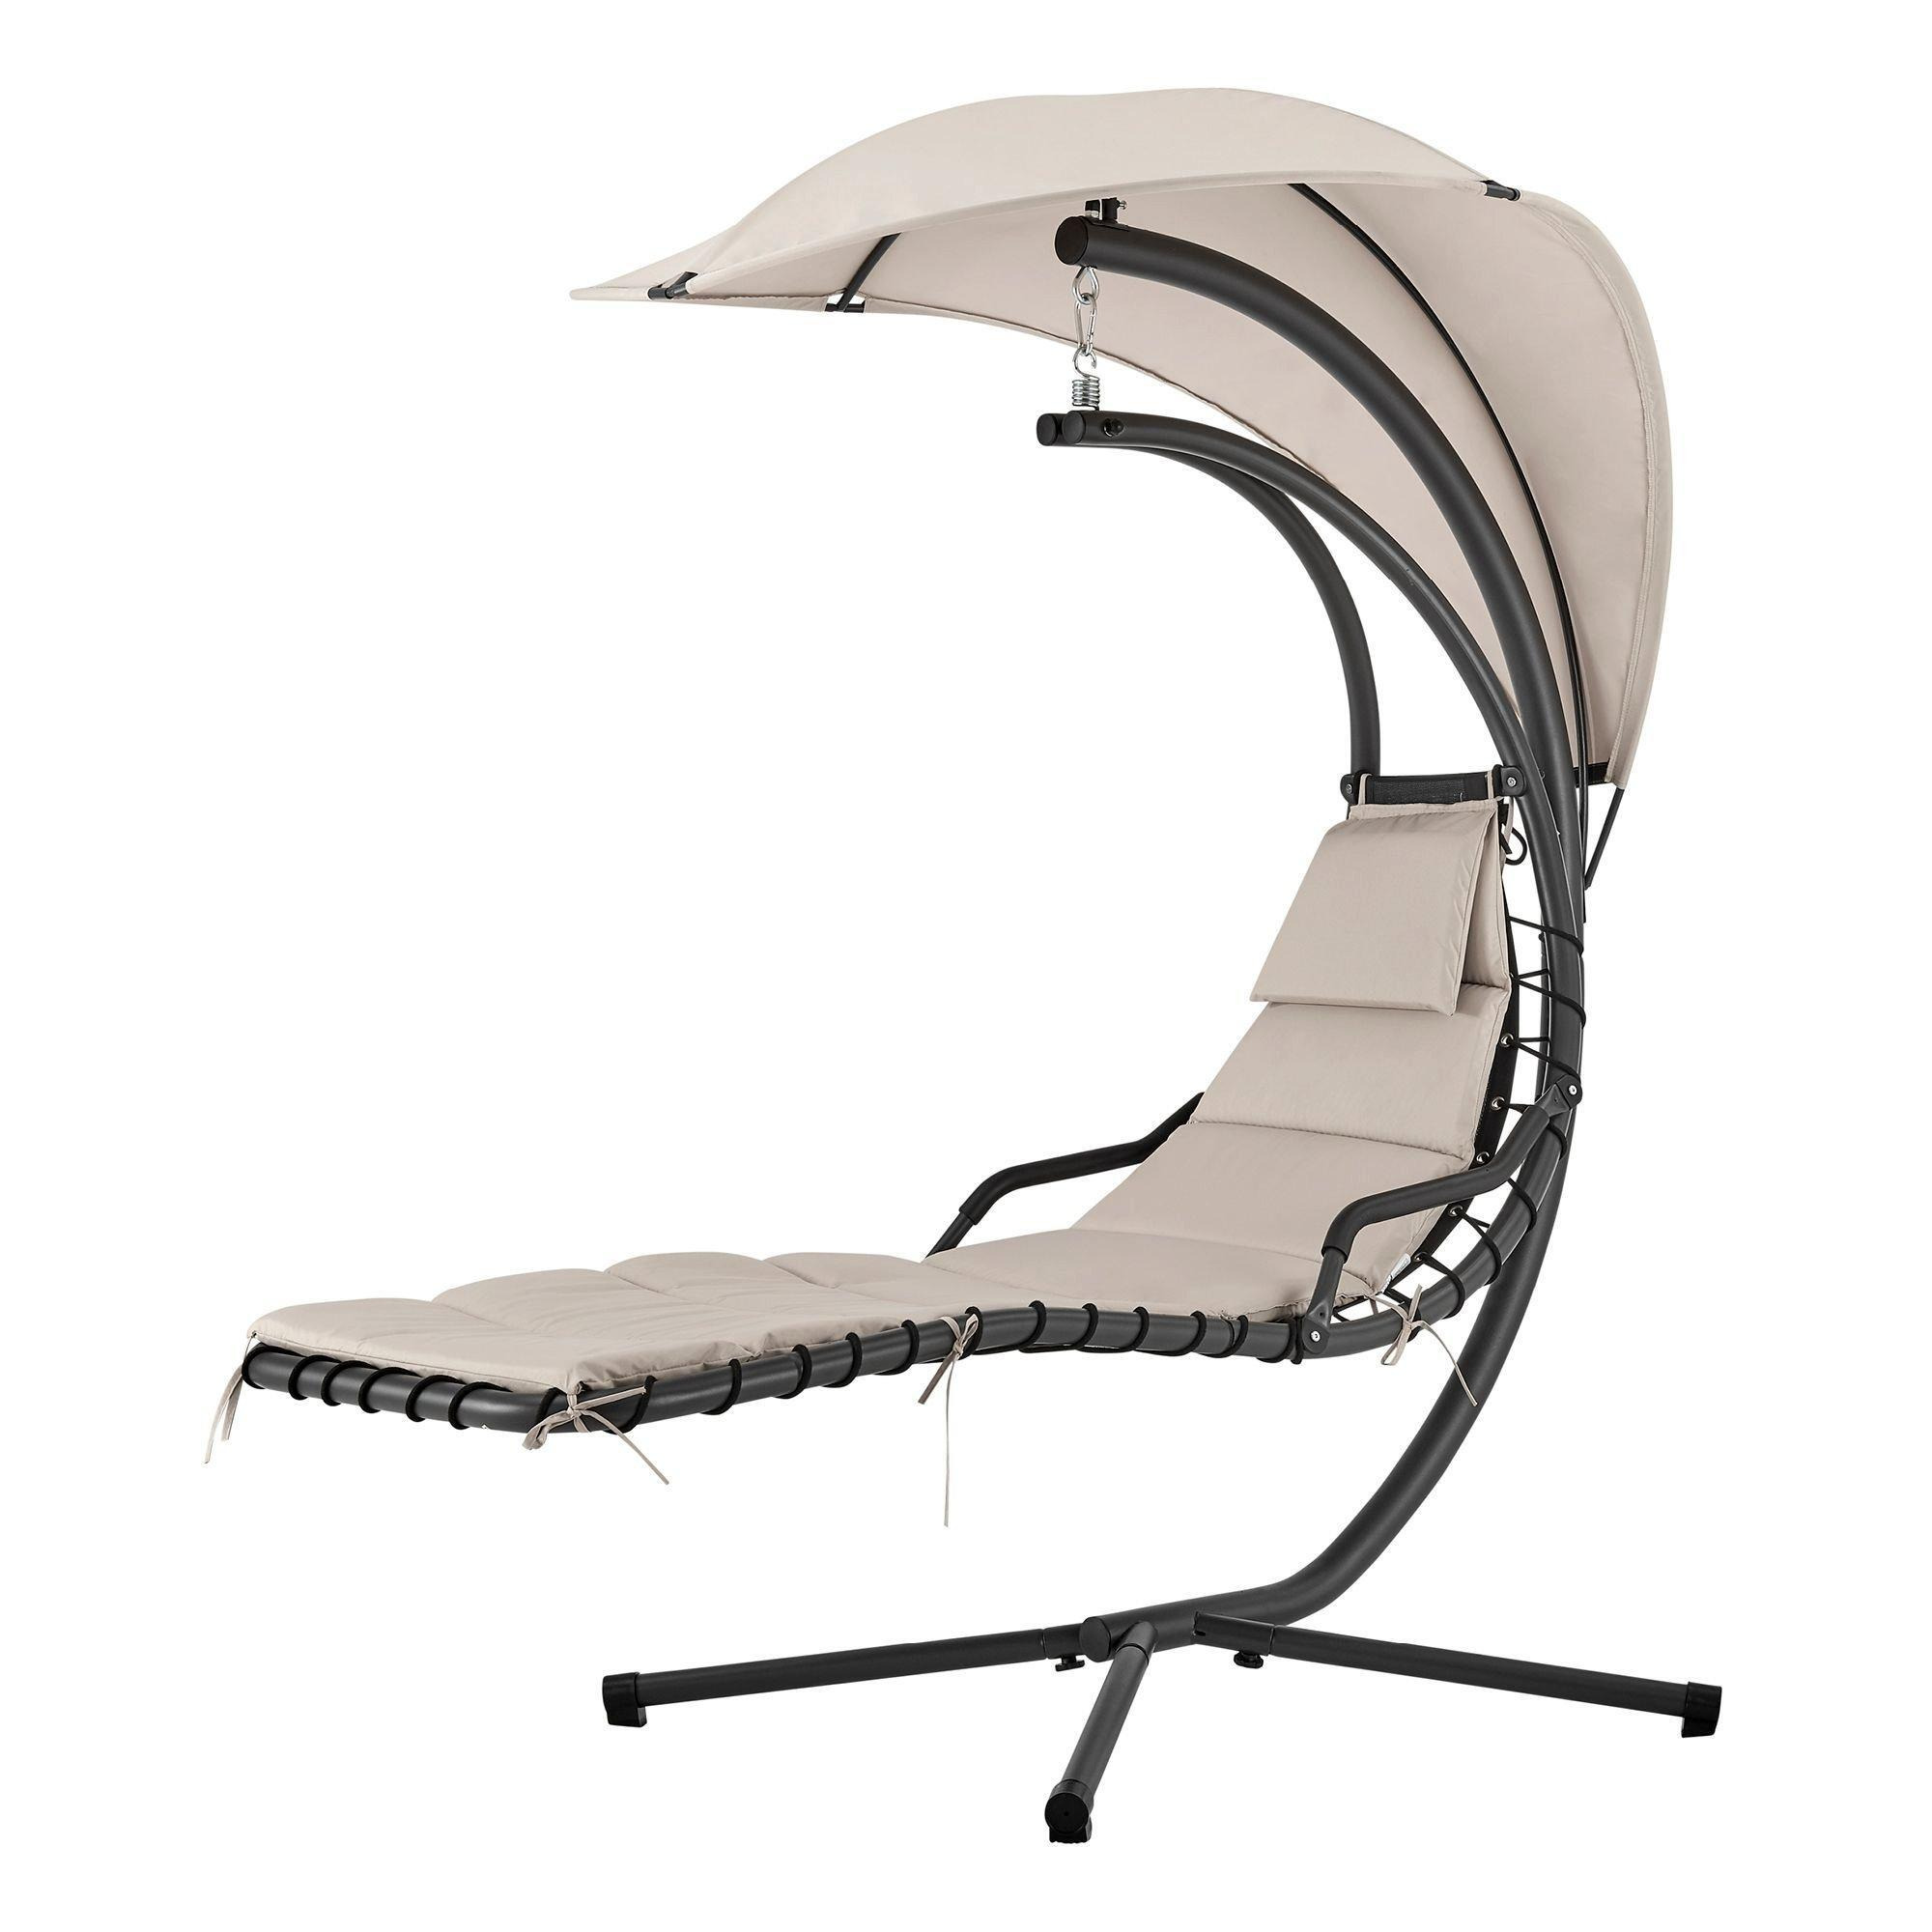 Bali Hanging Swing Lounger Chair With Canopy Hammock - image 1